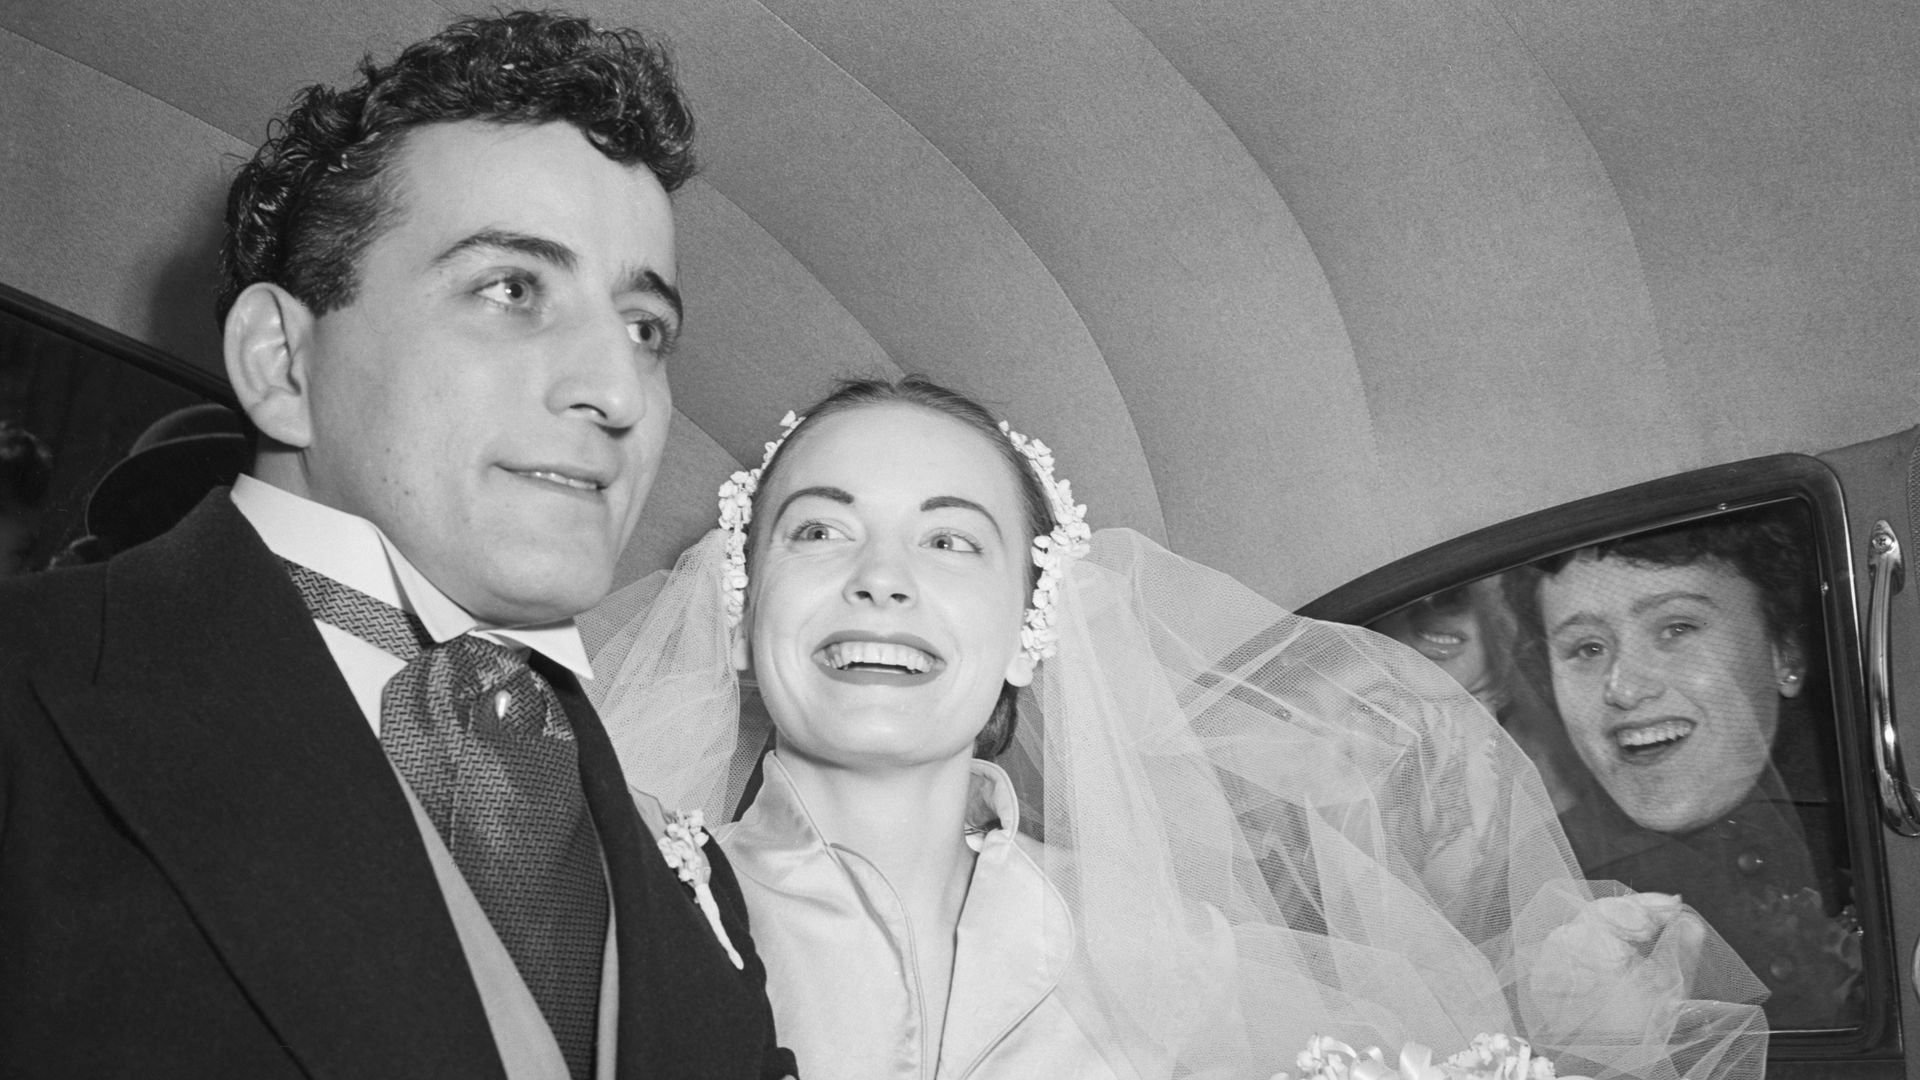 Tony Bennett and his first wife, Patricia Beech on their wedding day